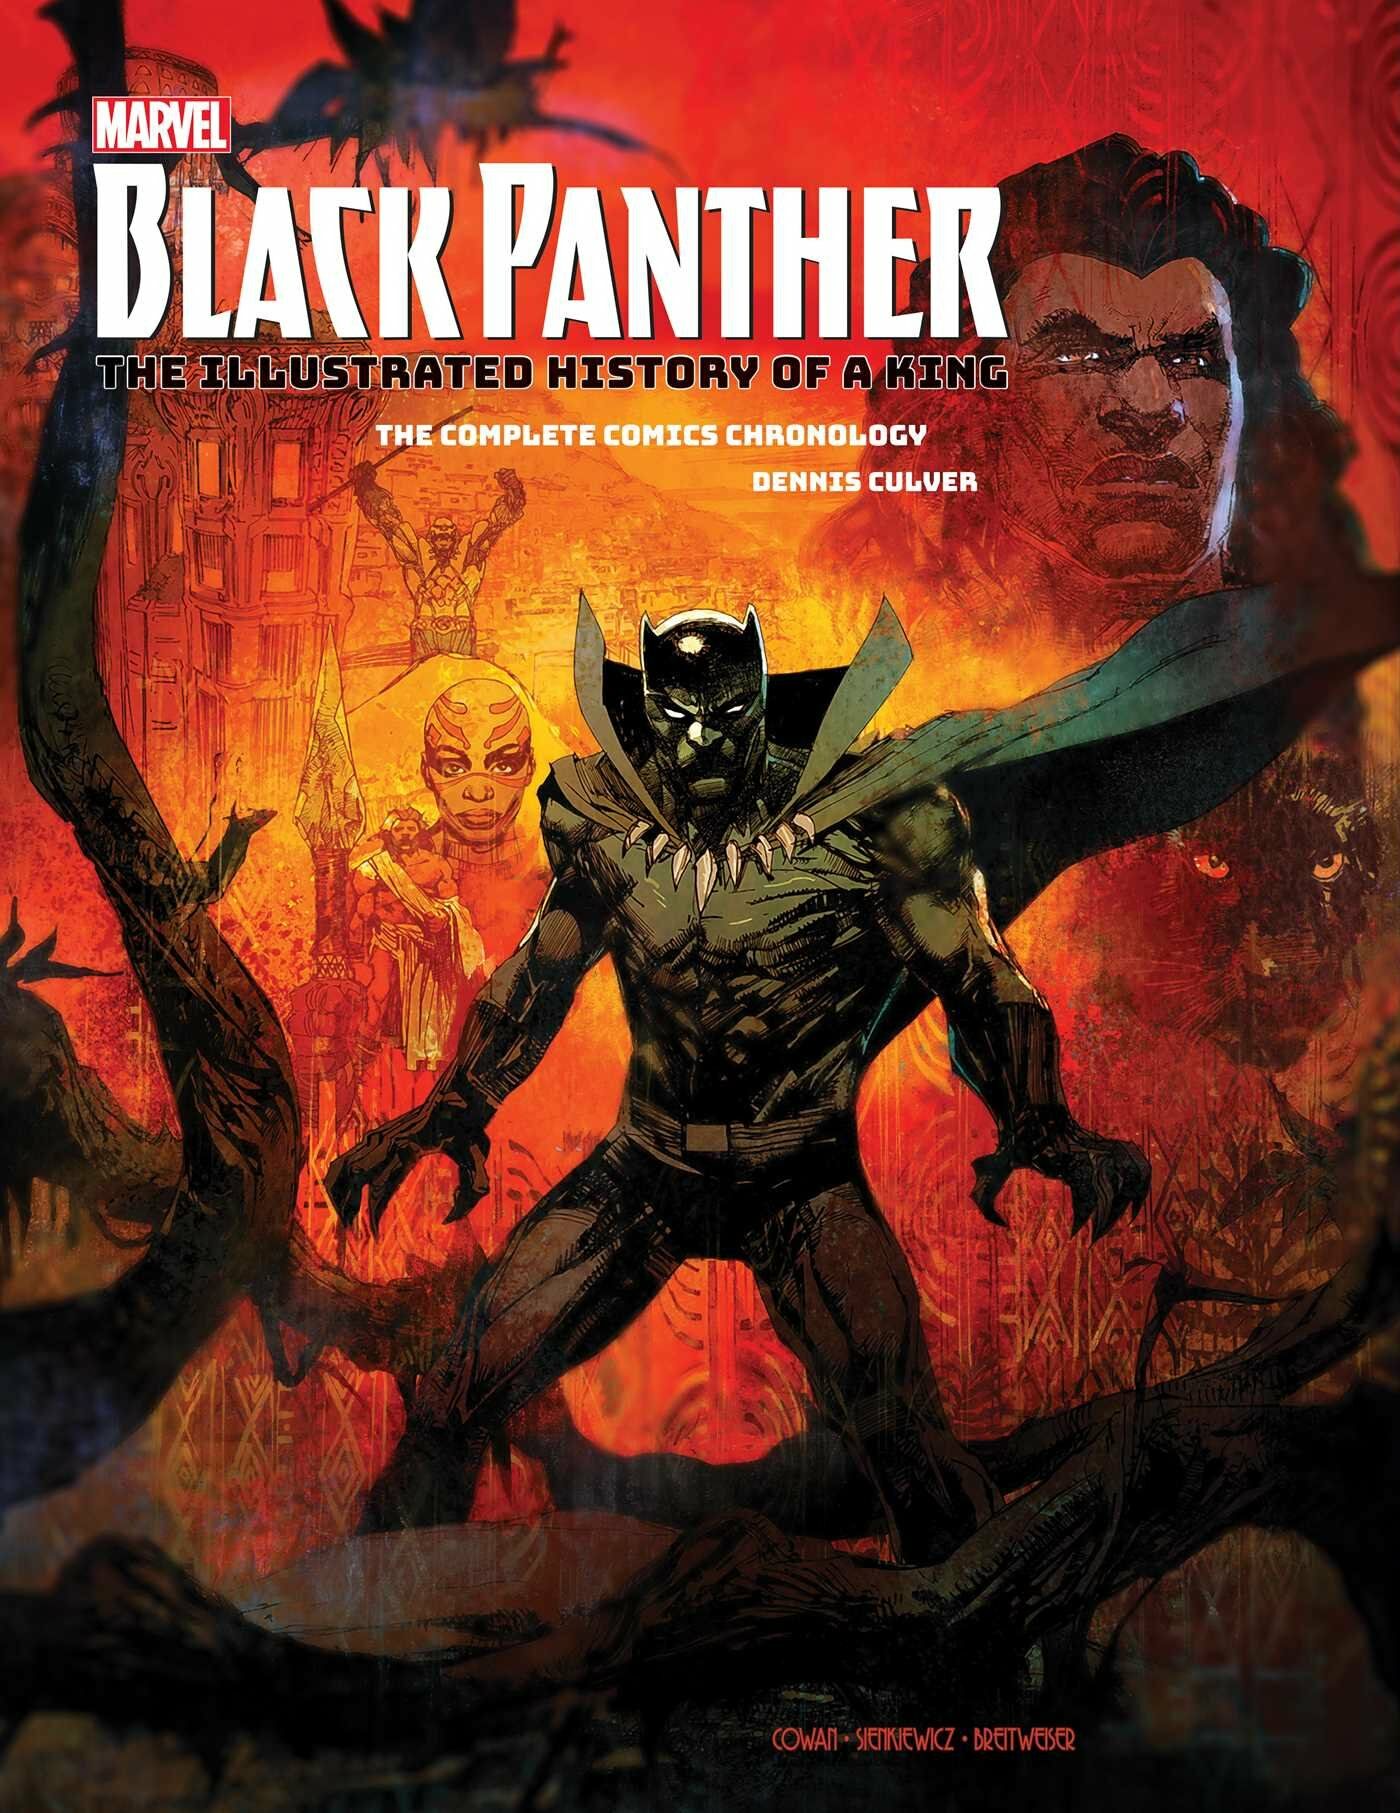 Marvels Black Panther: The Illustrated History of a King (Hardcover)